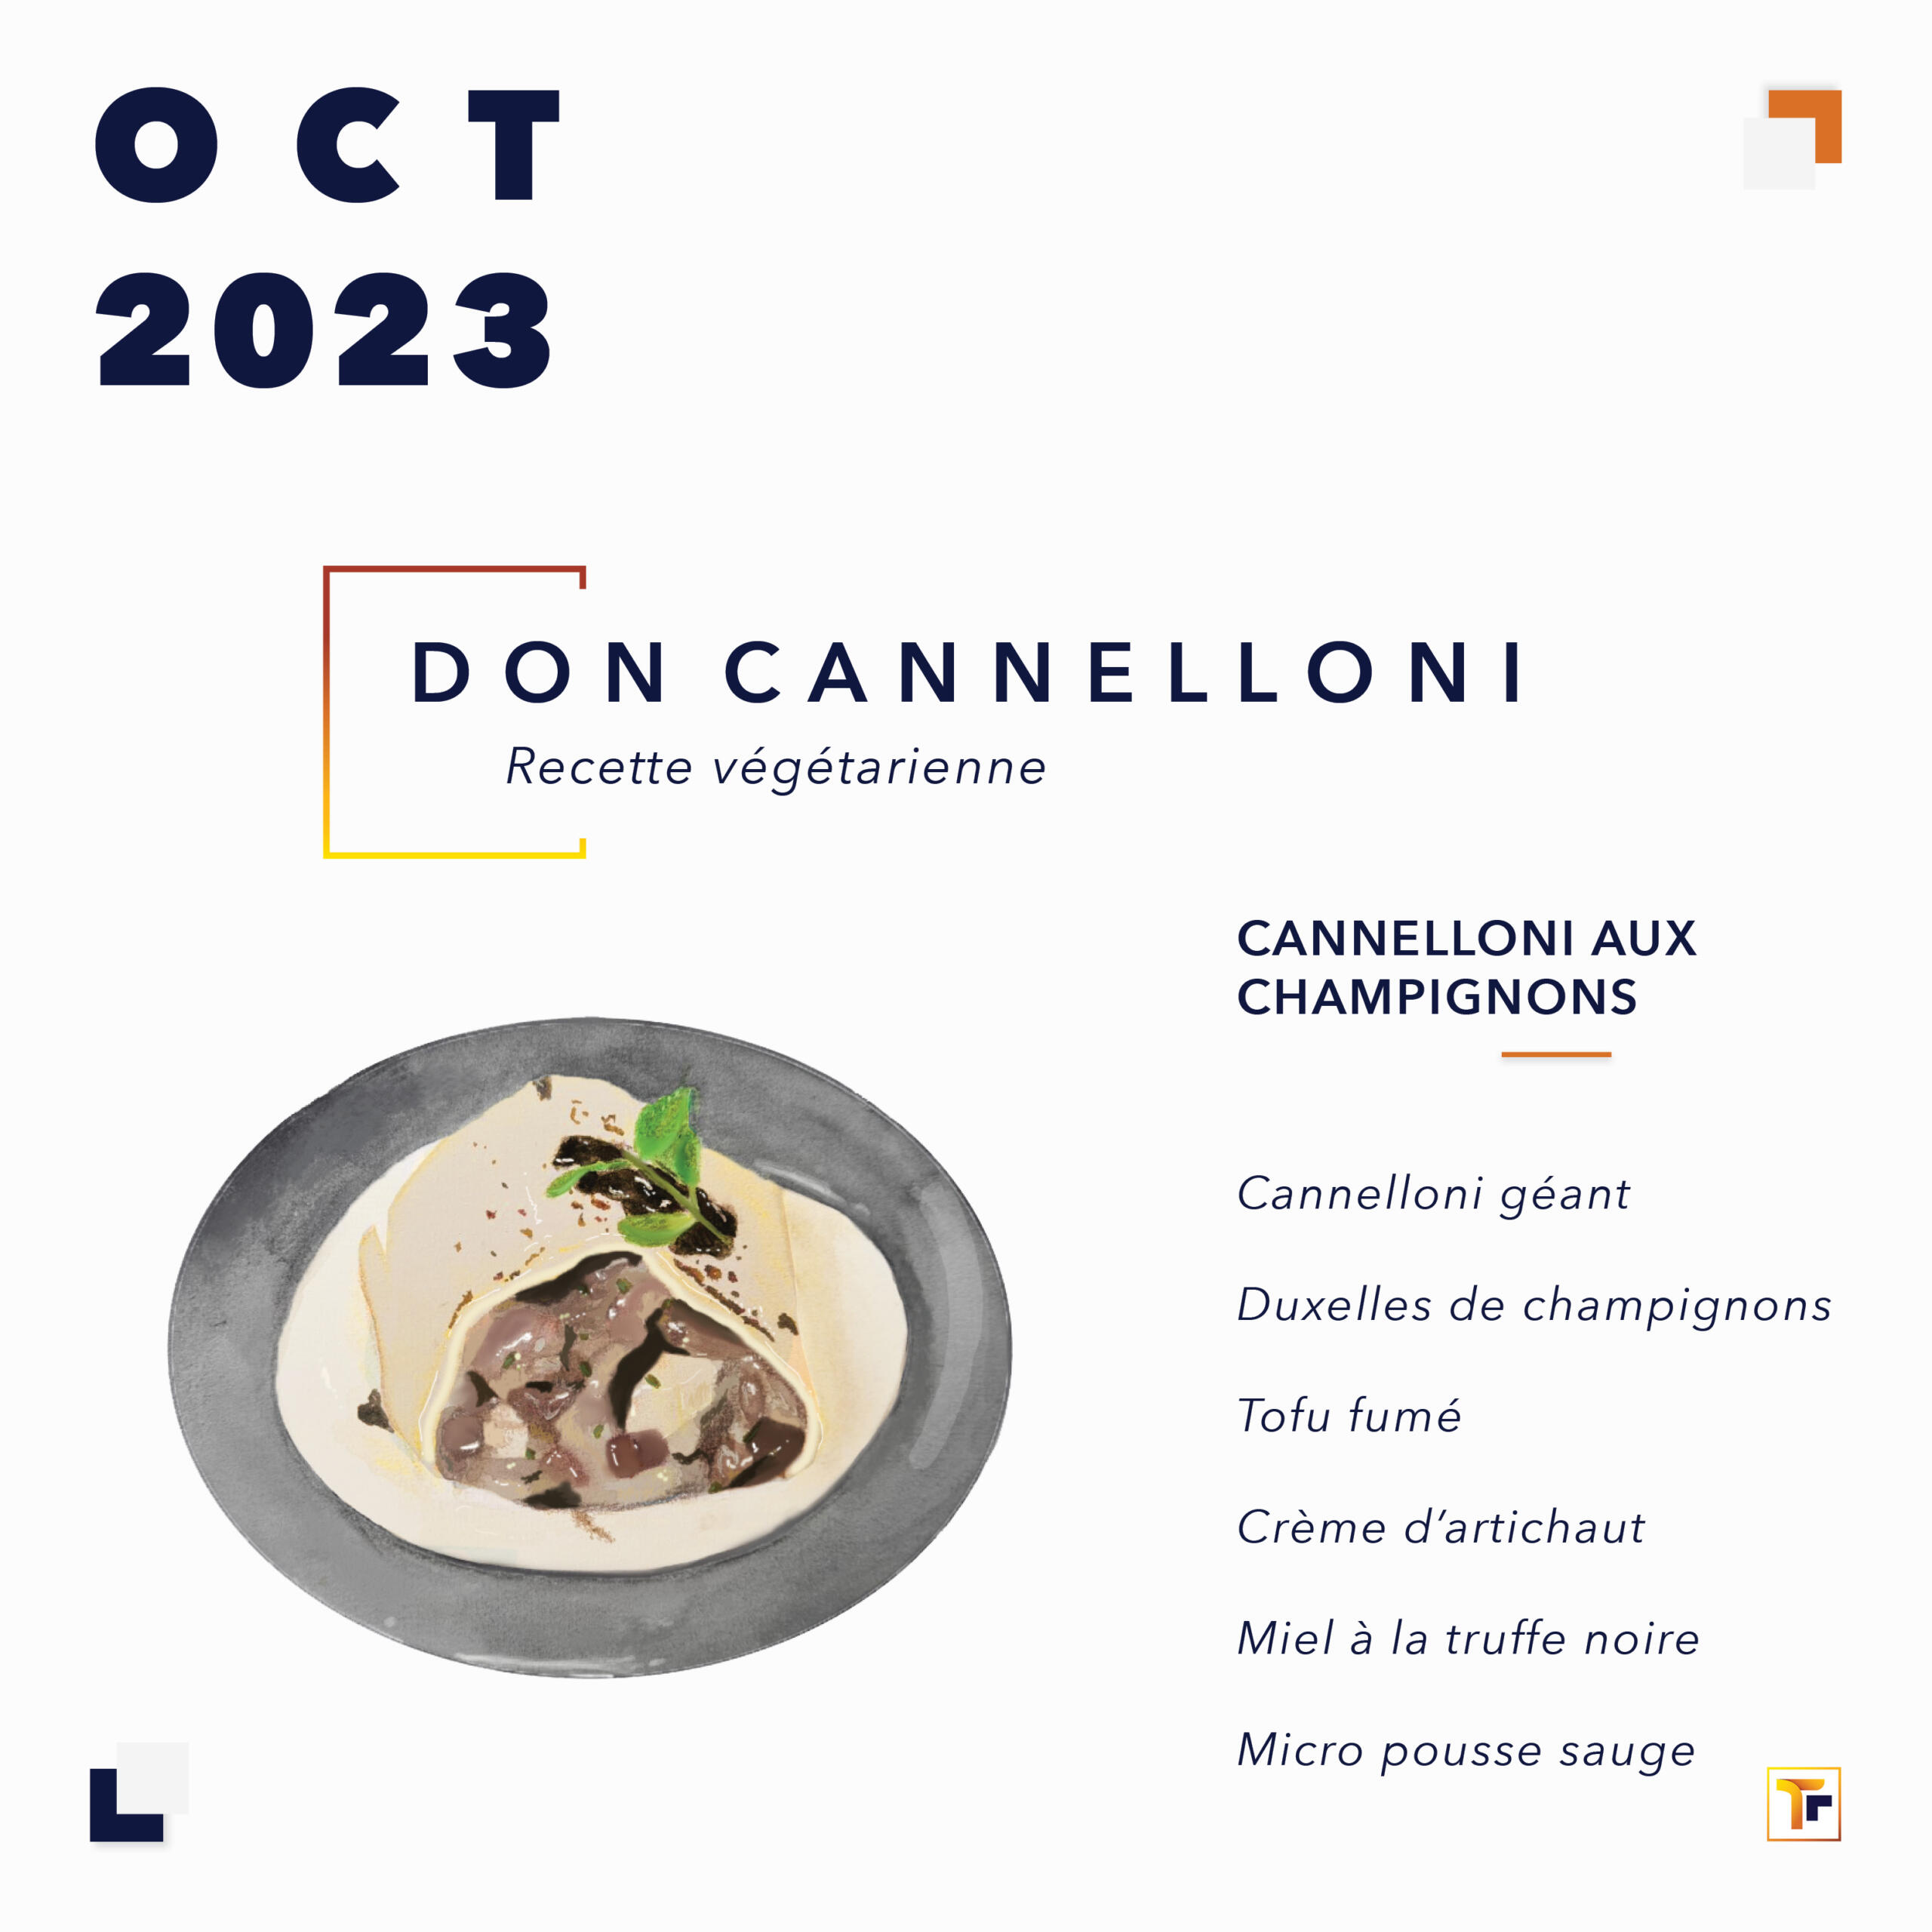 don cannelloni